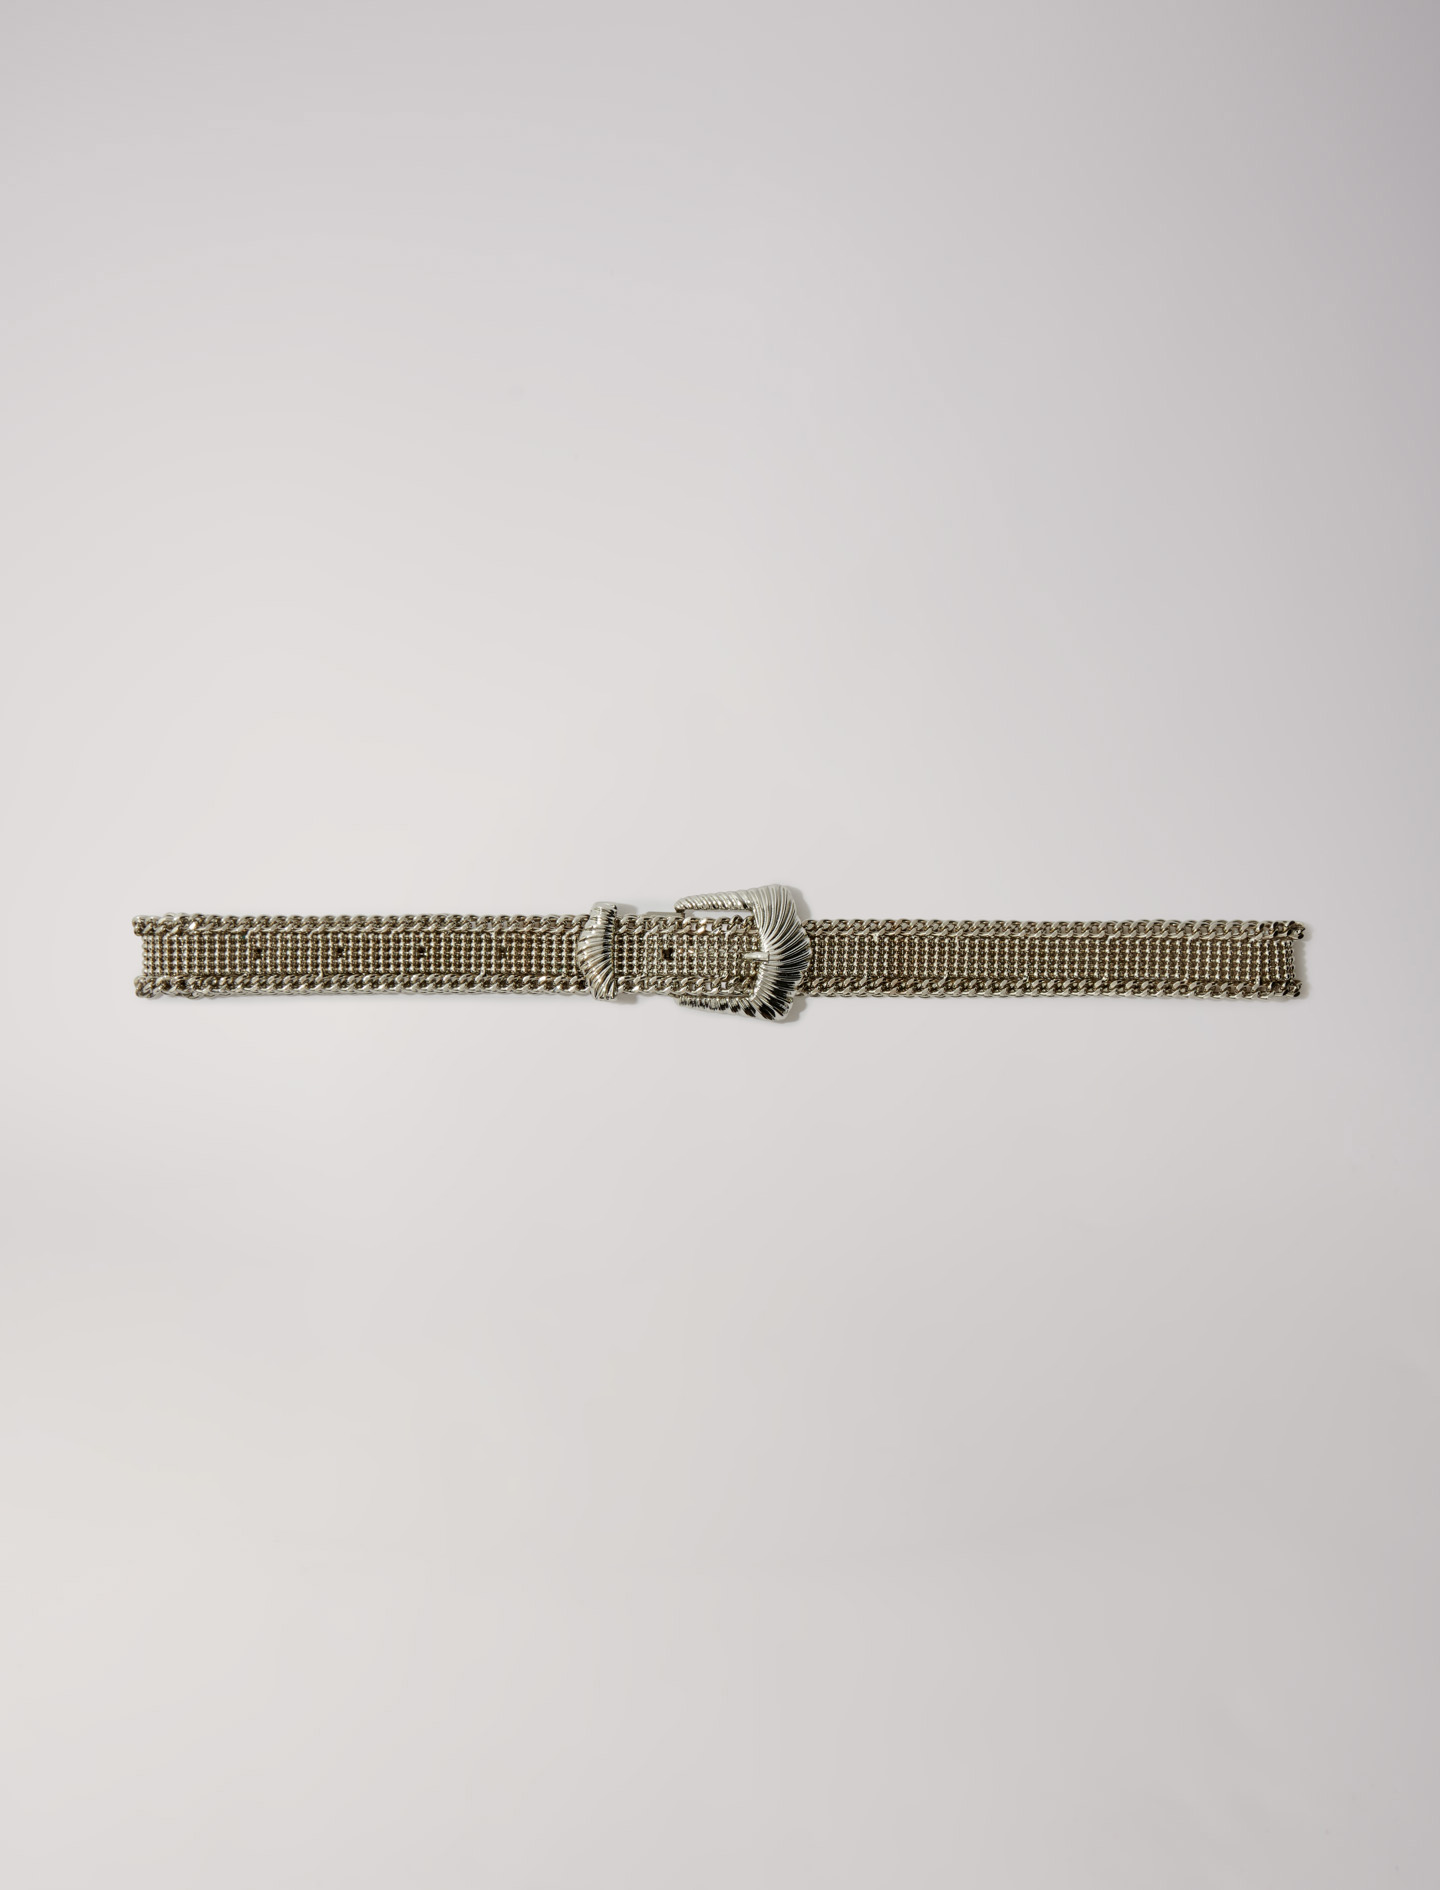 Mixte's brass Knit belt for Fall/Winter, size Mixte-Belts-US L / FR 3, in color Silver / Grey